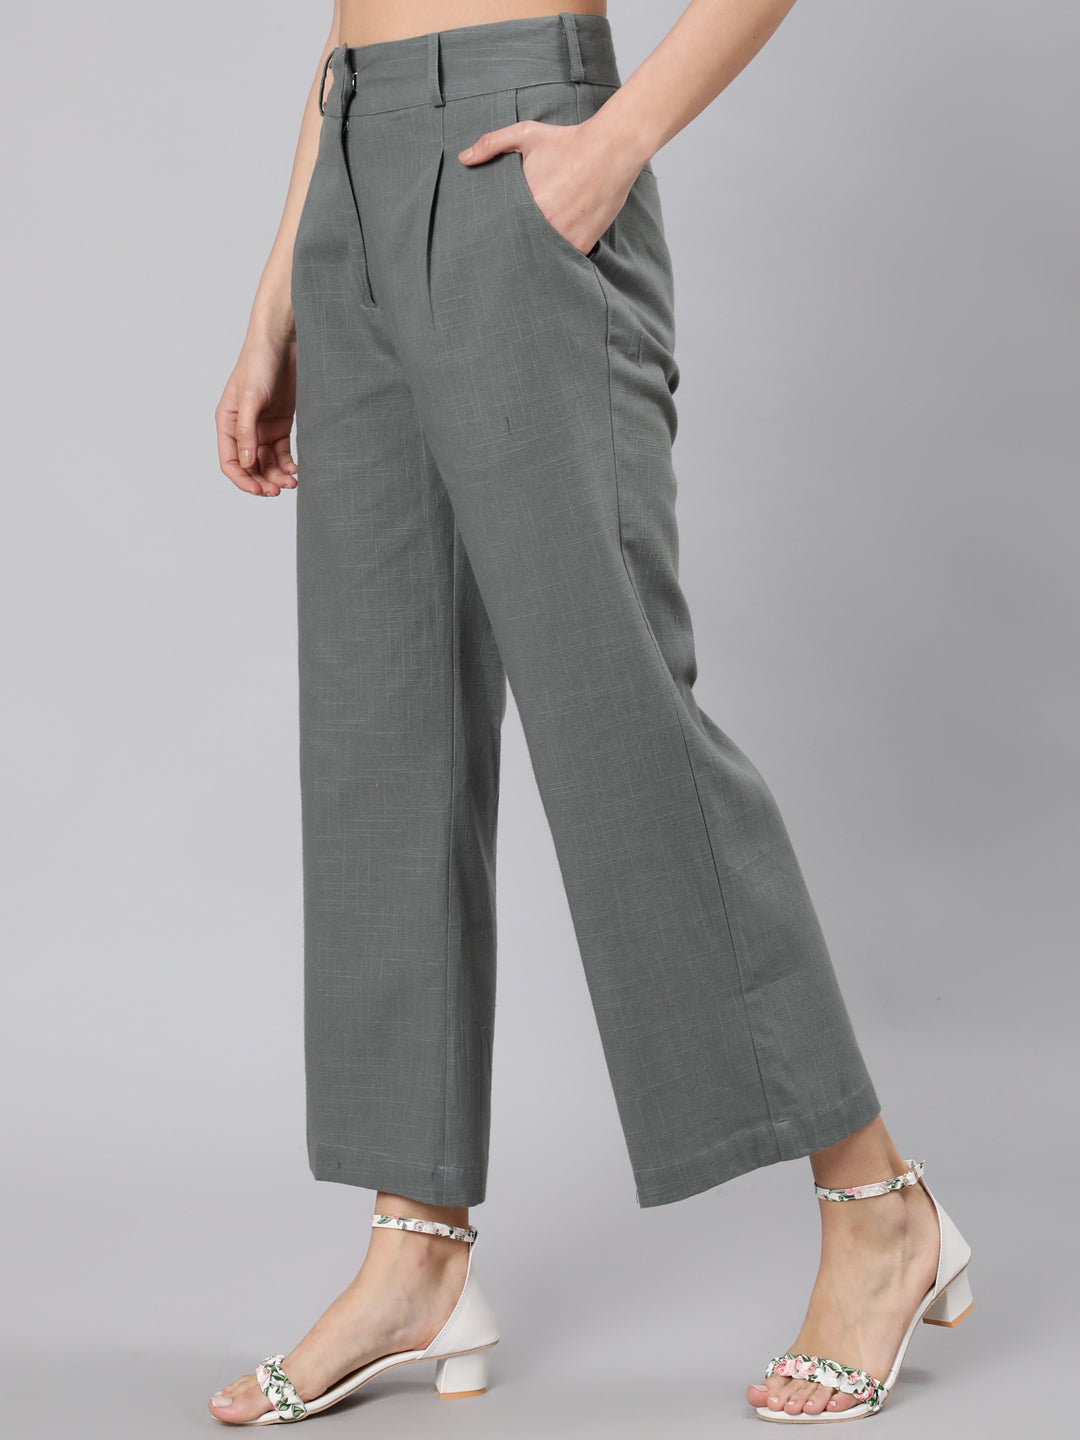 Autumn Ankle Length High Waist Pleated Suit For Women Formal Office Pants  For Women With Plus Size Work Harem S XL 210601 From Luo02, $24.04 |  DHgate.Com